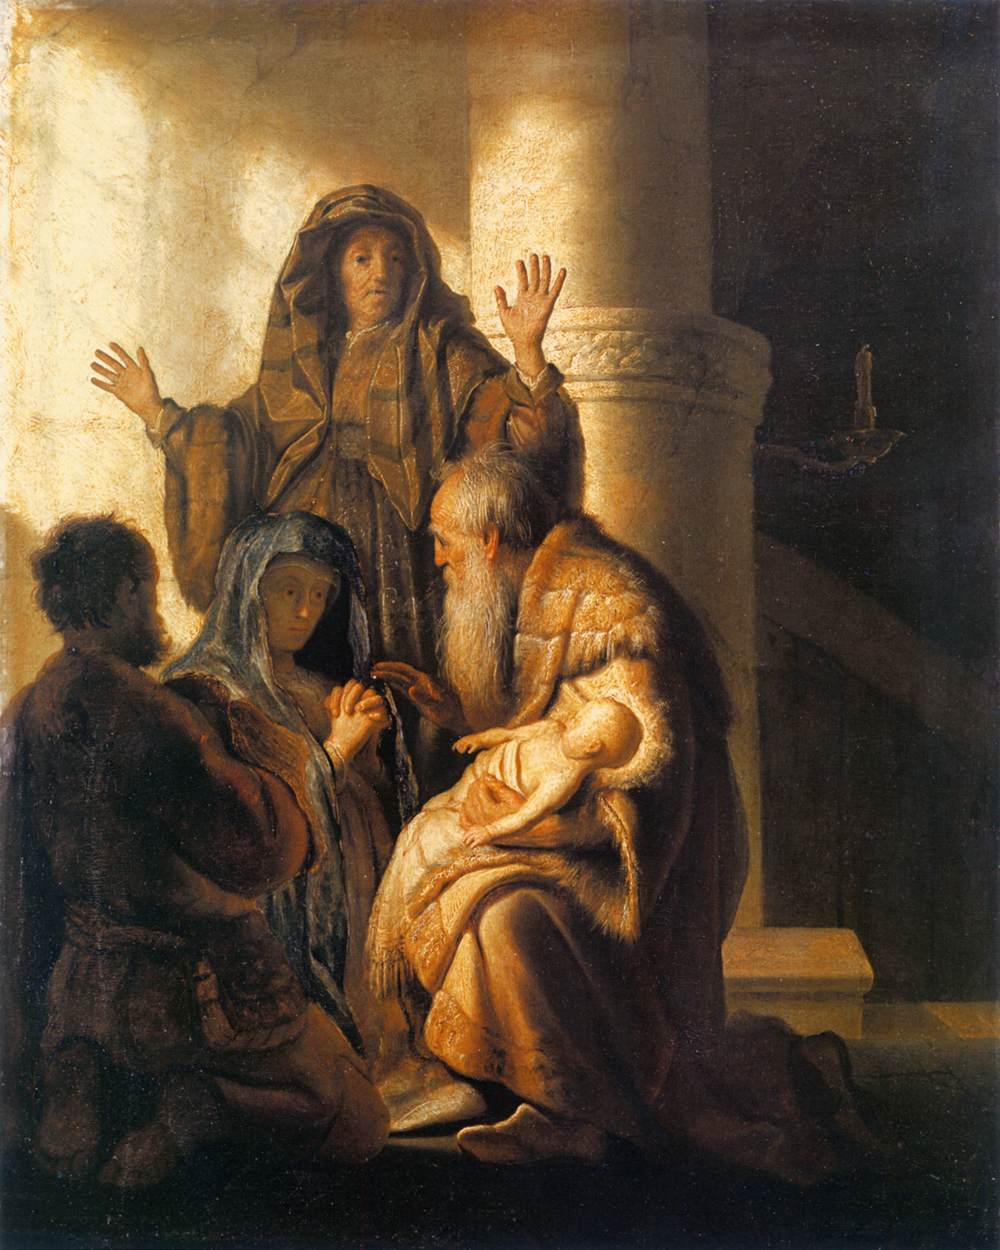 Simeon and Anna Recognize the Lord in Jesus